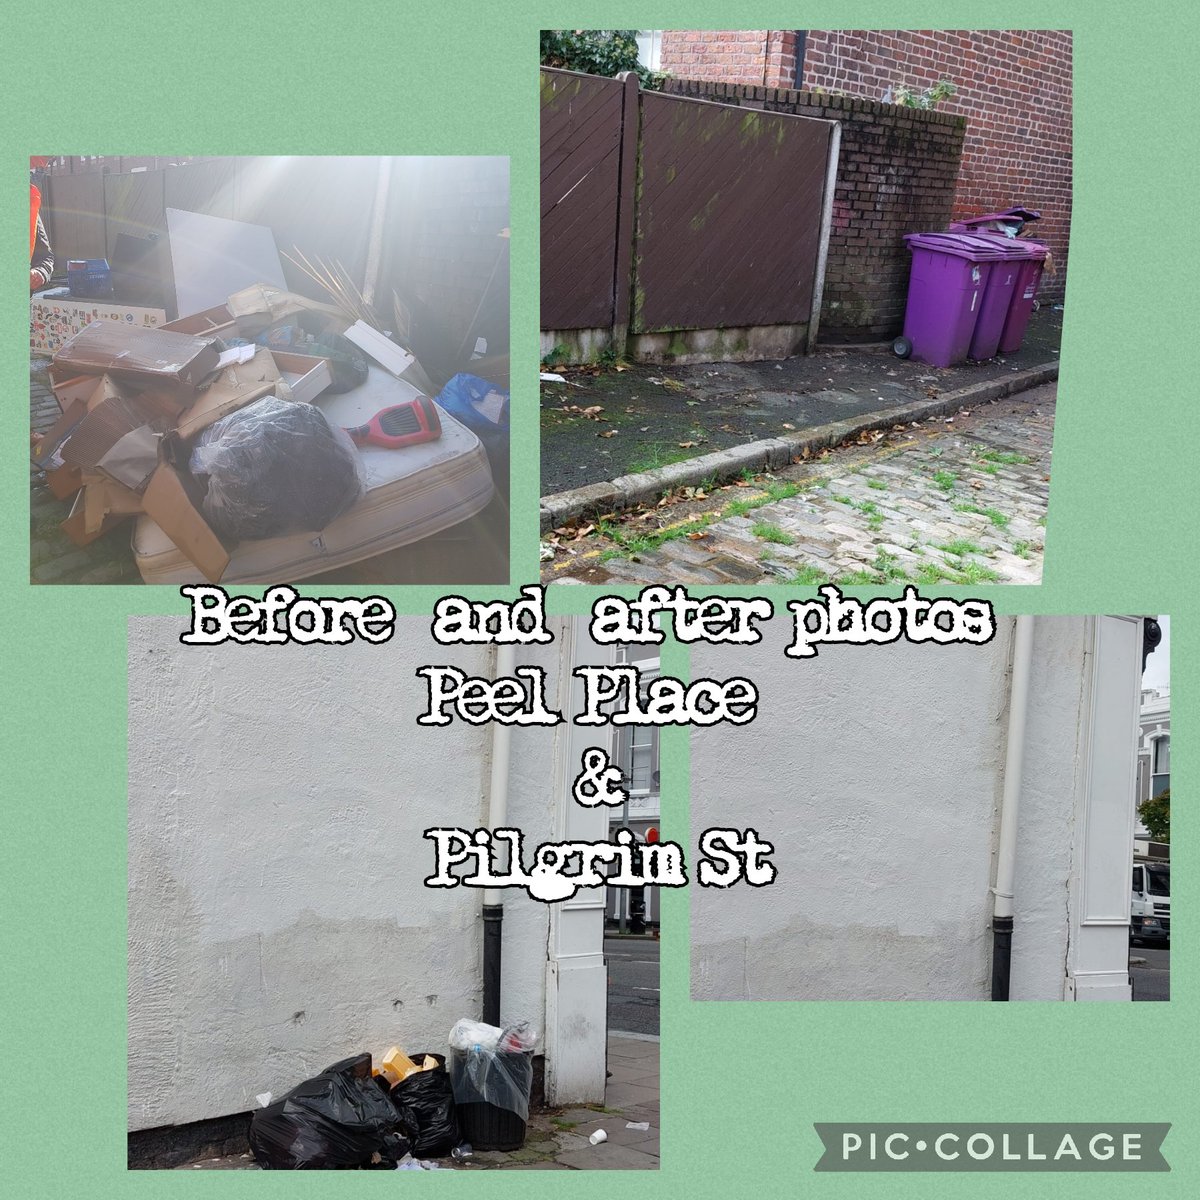 There is no excuse for dumping. A business was contacted on the day and another has been issued a Sect 47 under the Environment Protection Act.  Both areas were cleaned up by @lpool_LSSL 
#Canningward #Loveourcommunity